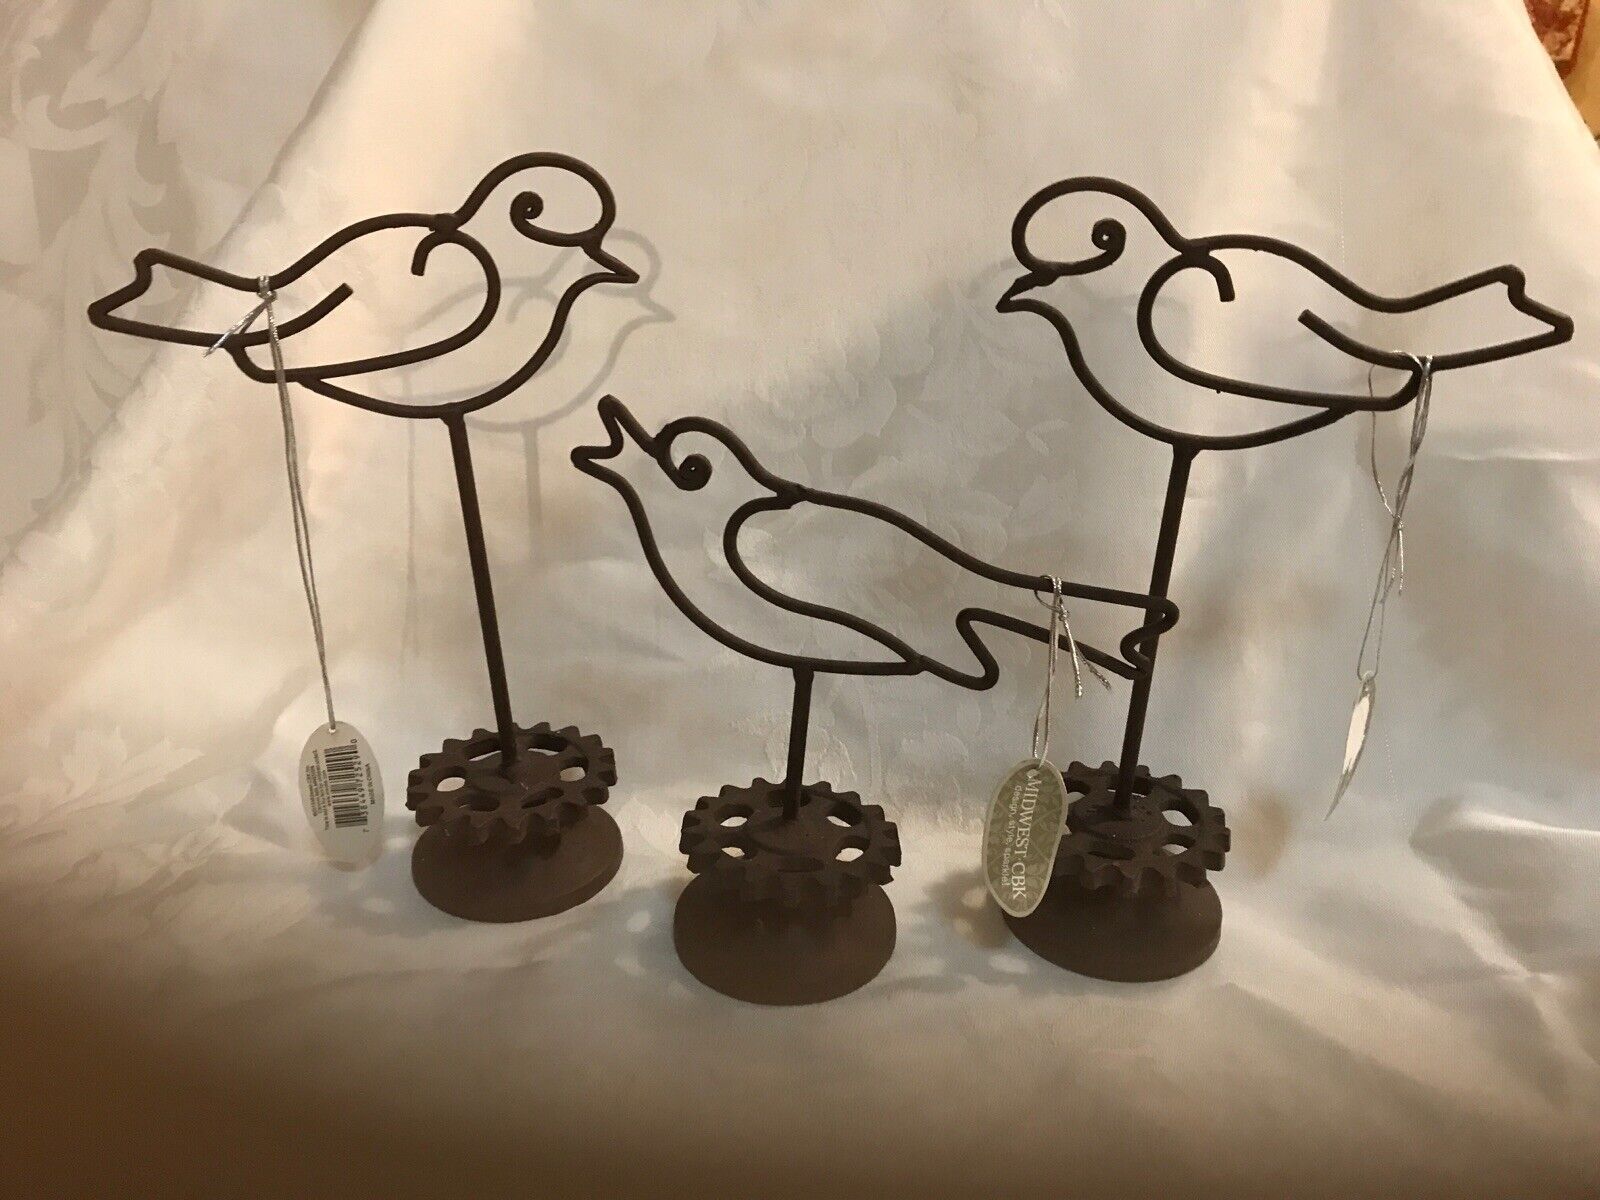 Rustic 3 Metal Birds With Gear Base Midwest CBK New With Tags